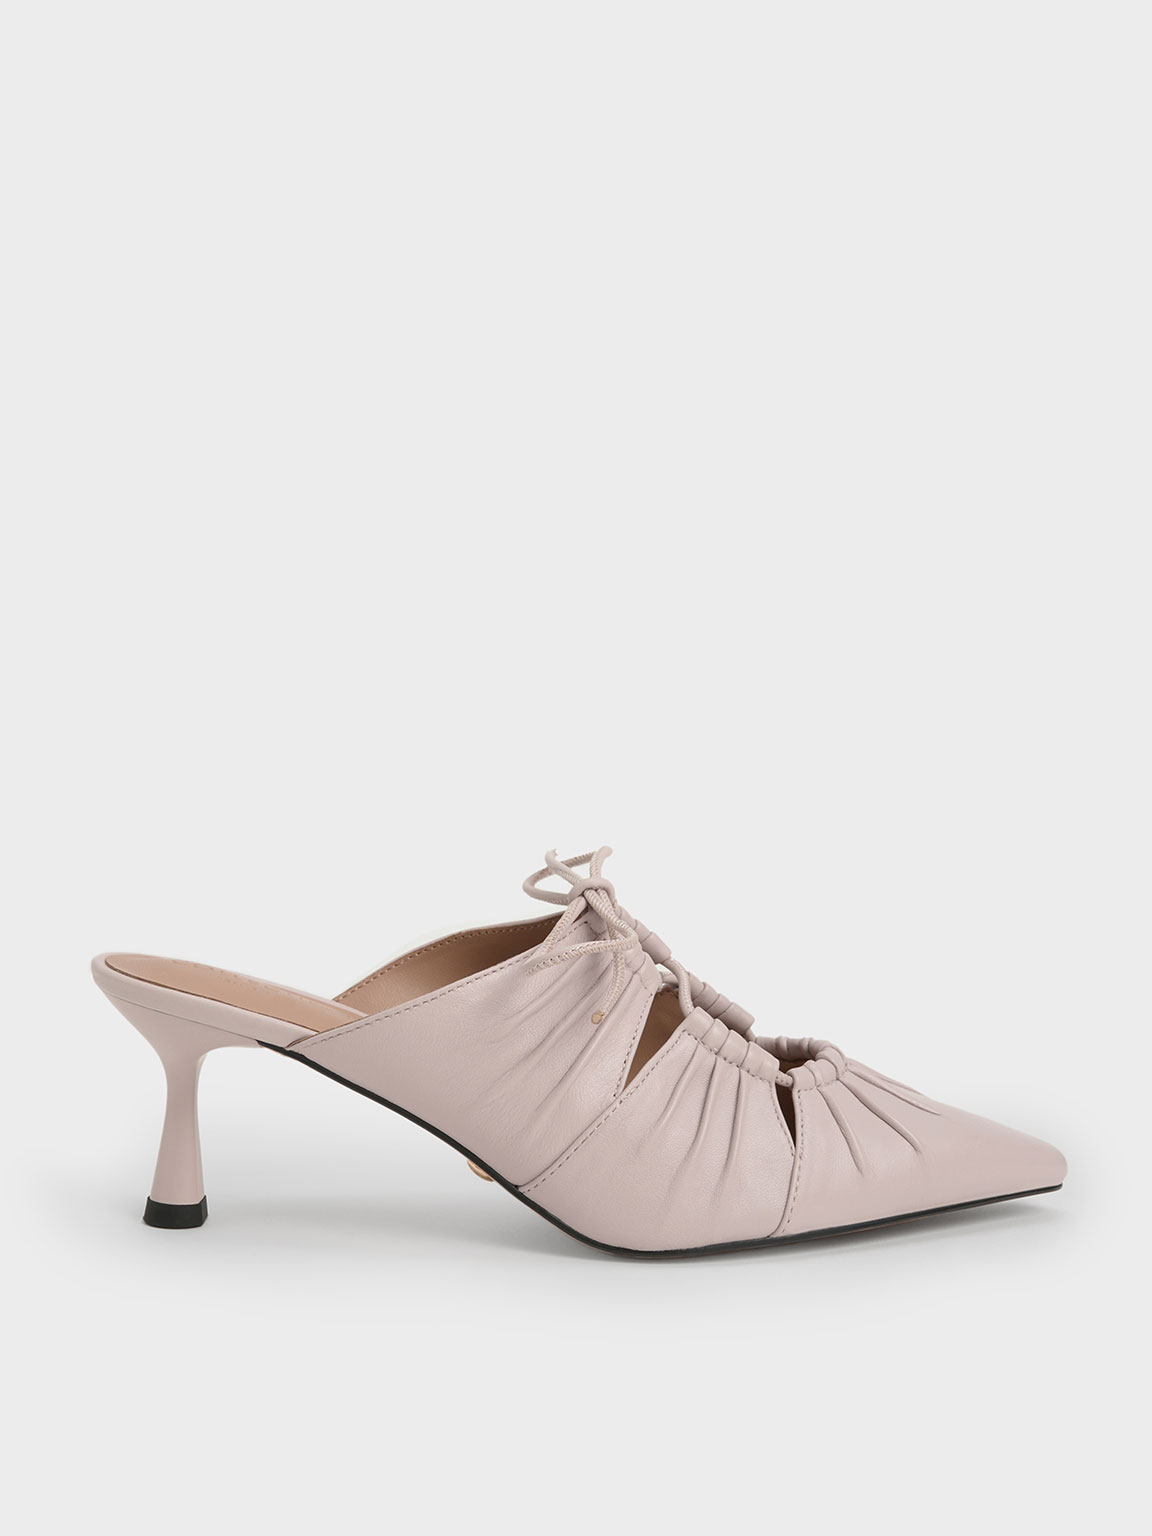 Landis Leather Ruched Bow-Tie Mules